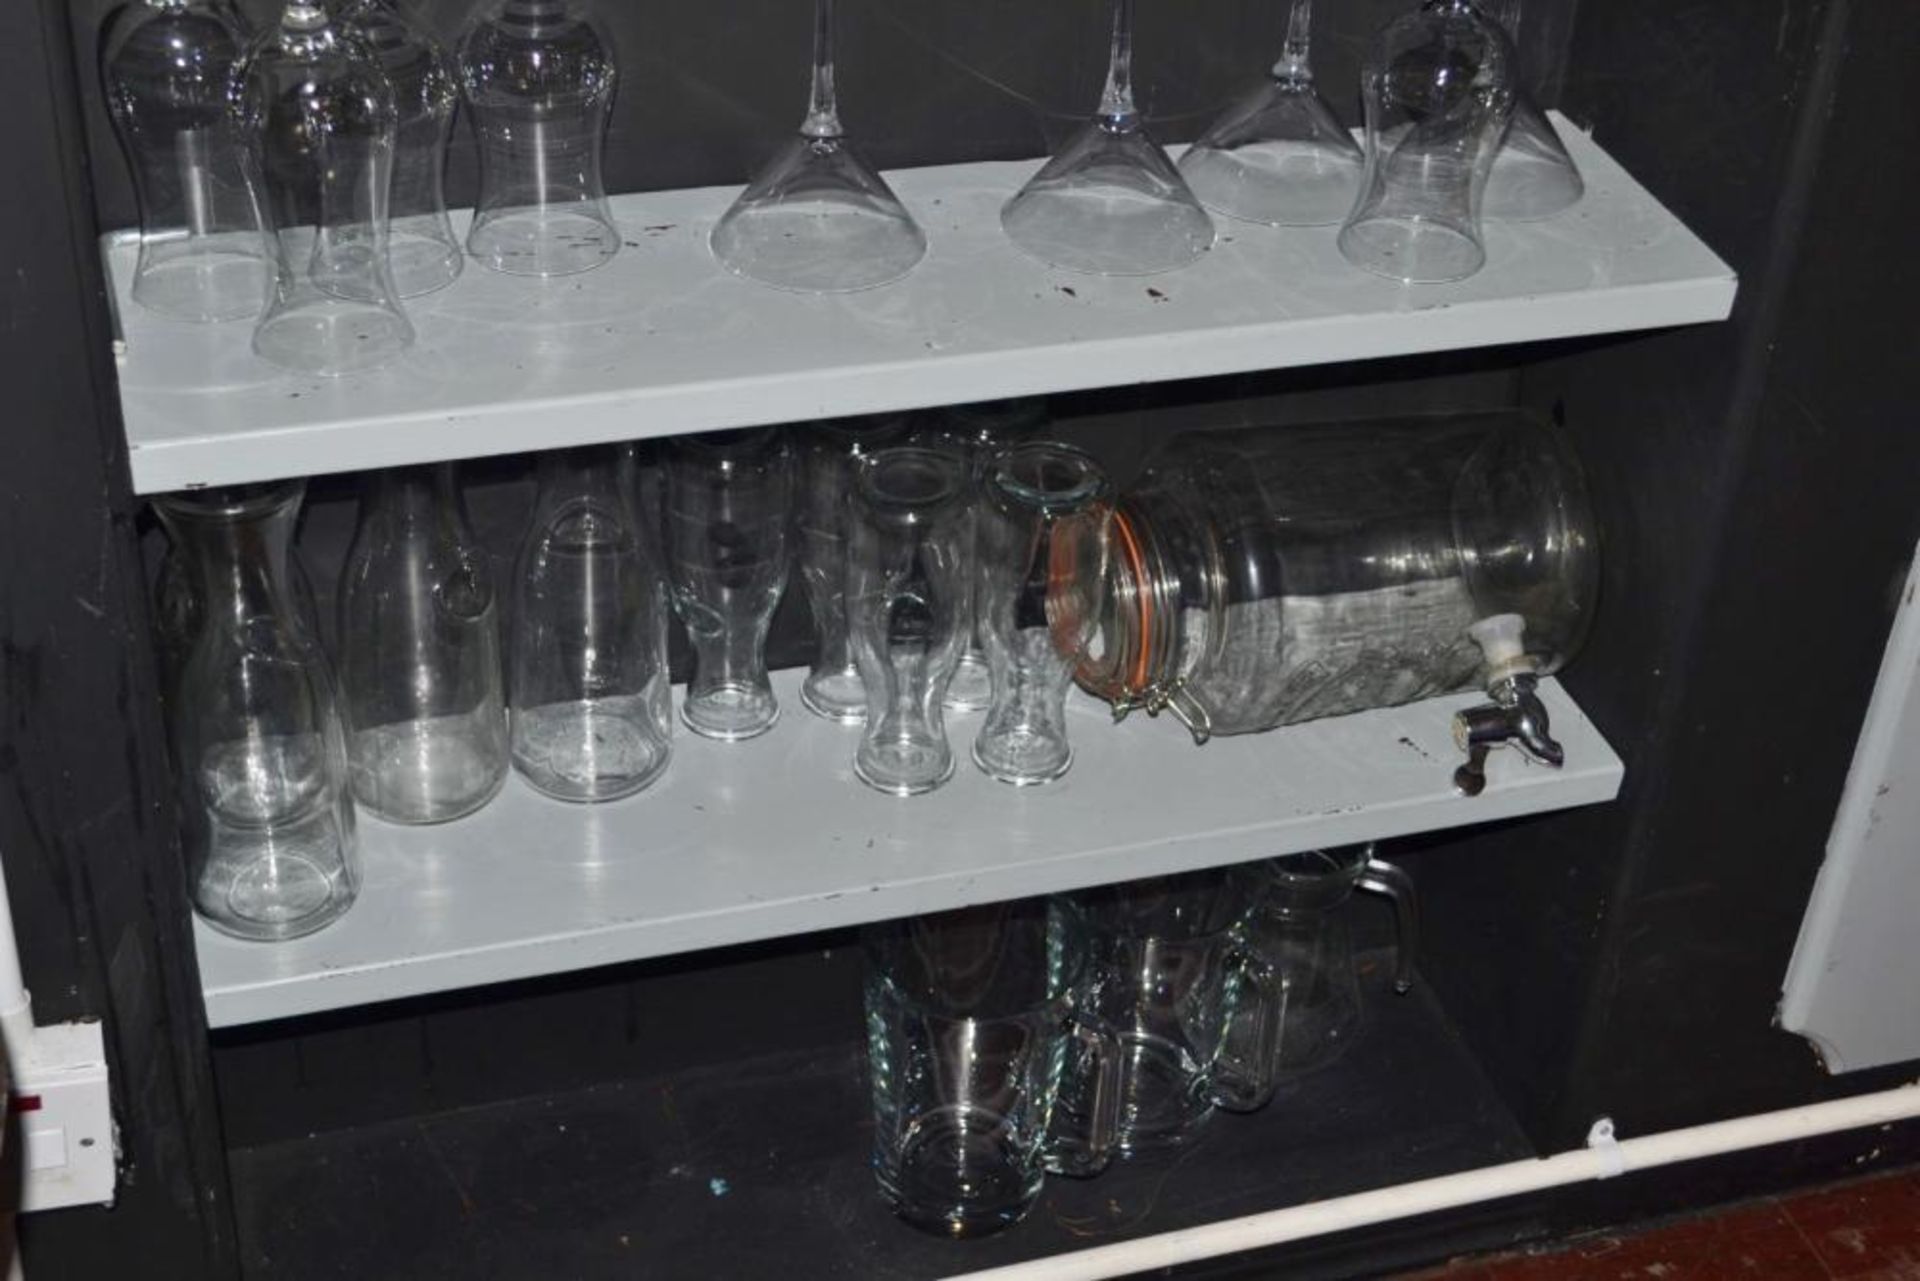 1 x Large Collection of Wine Glasses, Beer Jugs and Glassware - Includes Approx 400 Pieces - Ref BB5 - Image 9 of 13